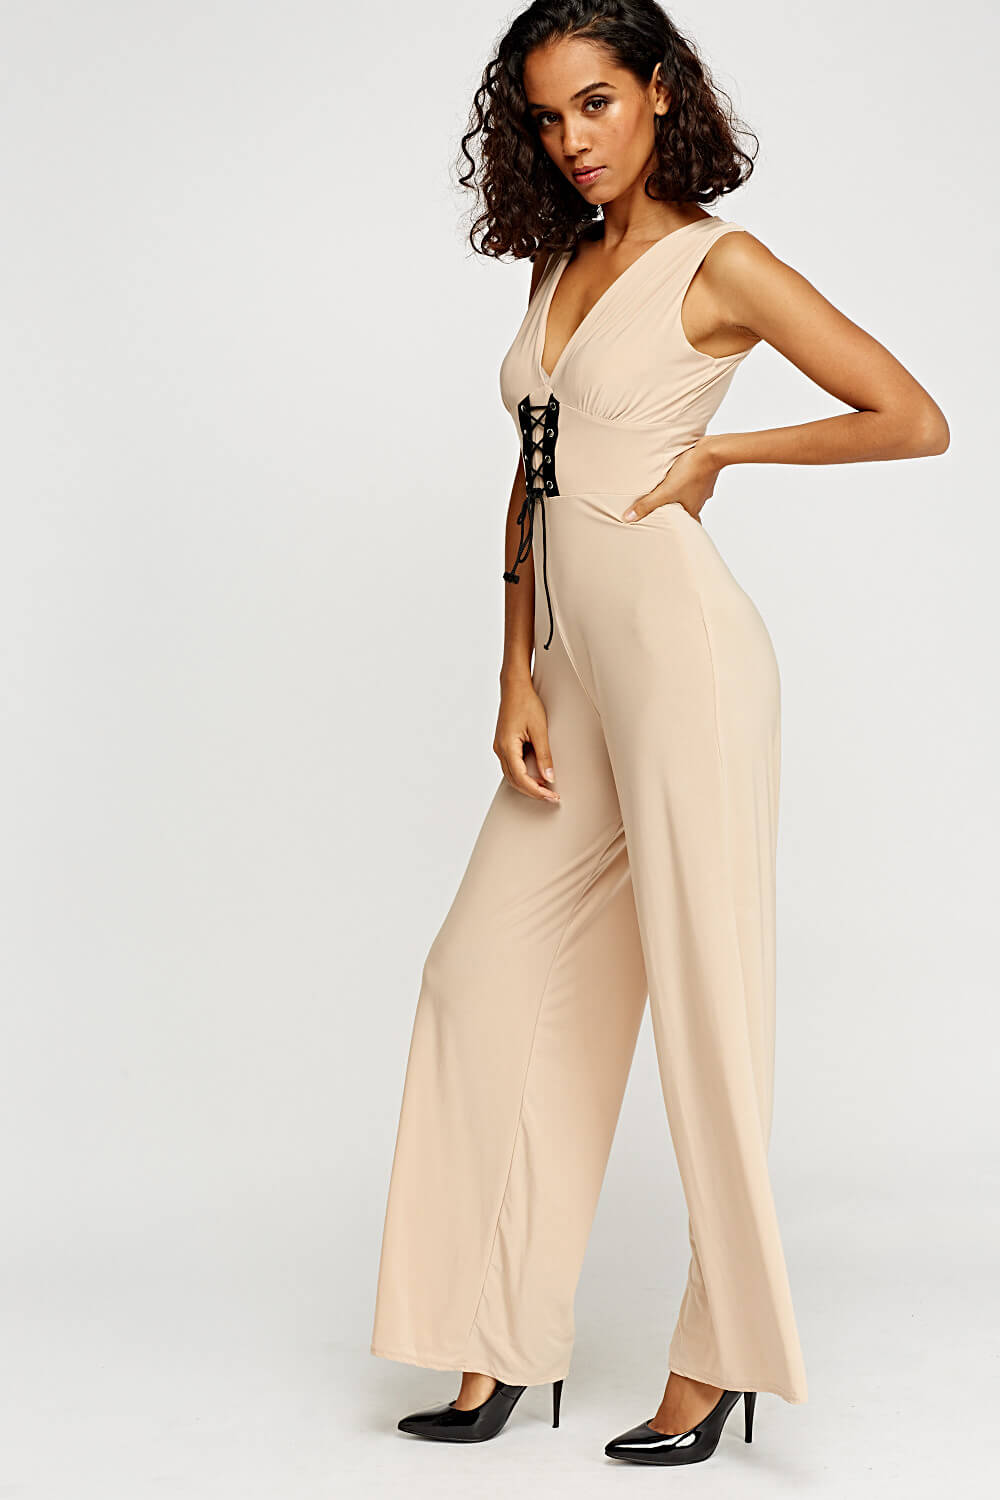 5 Stylish Jumpsuits to Keep You Warm On a Night Out | E5P Blog